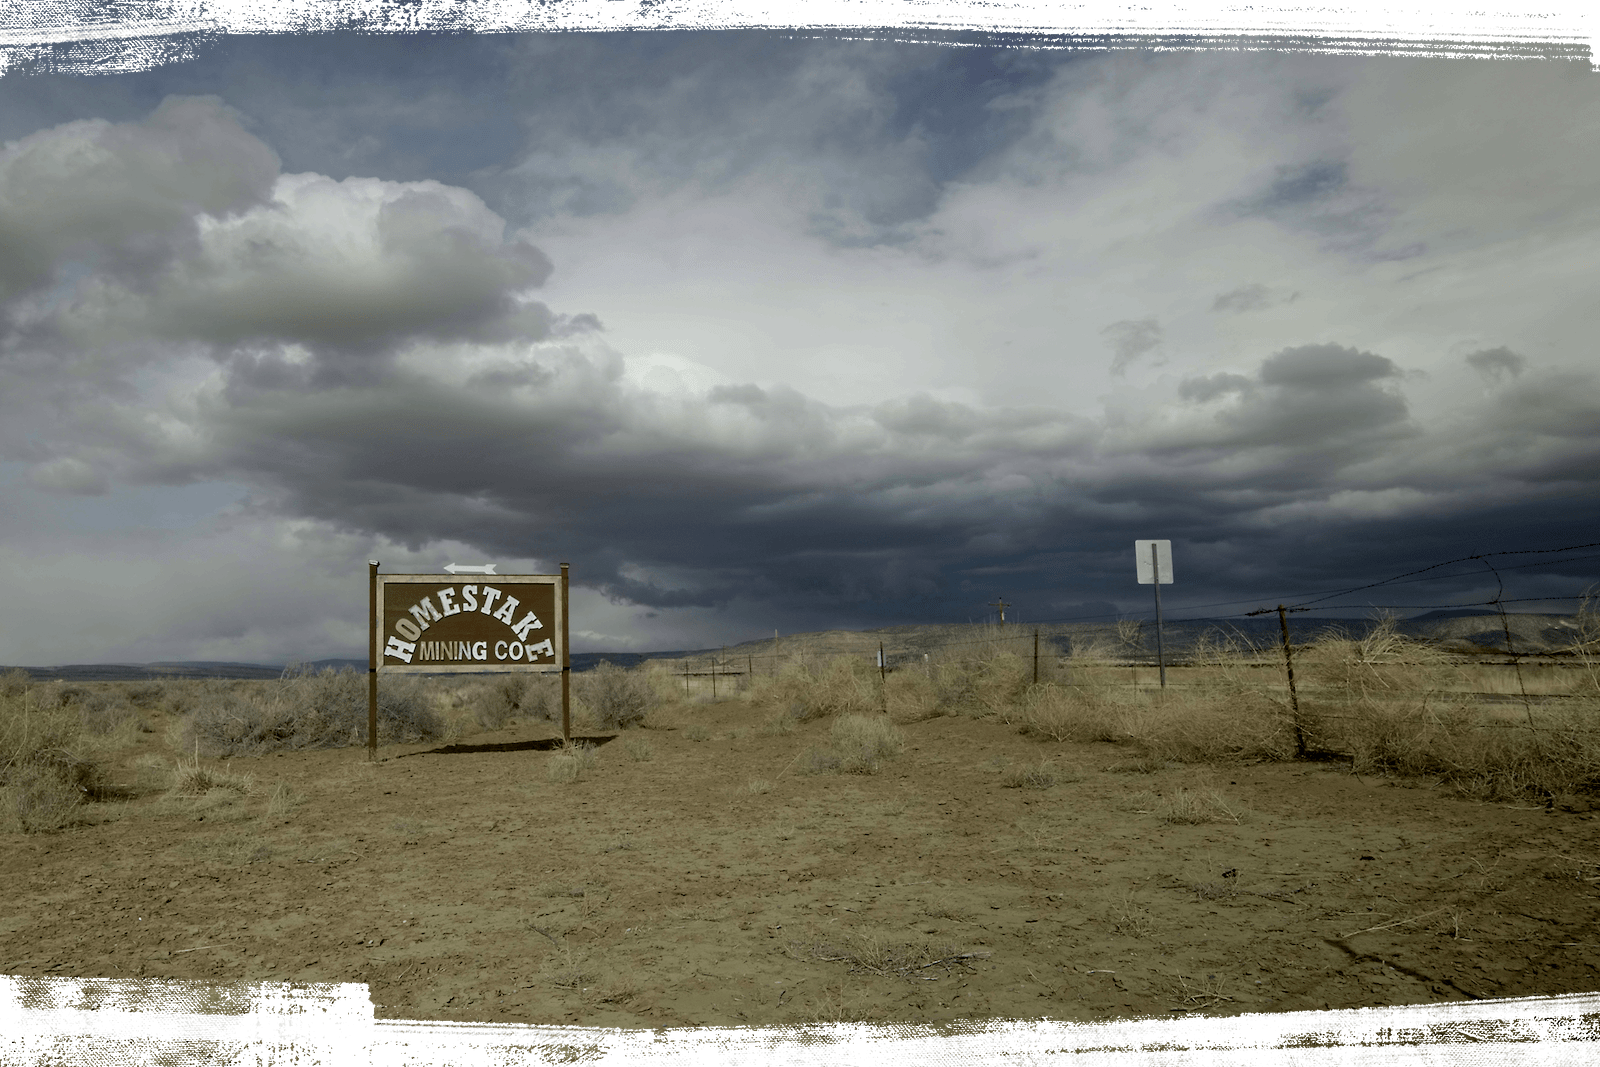 A brown sign demarcating the Homestake mine, surrounded by plains.